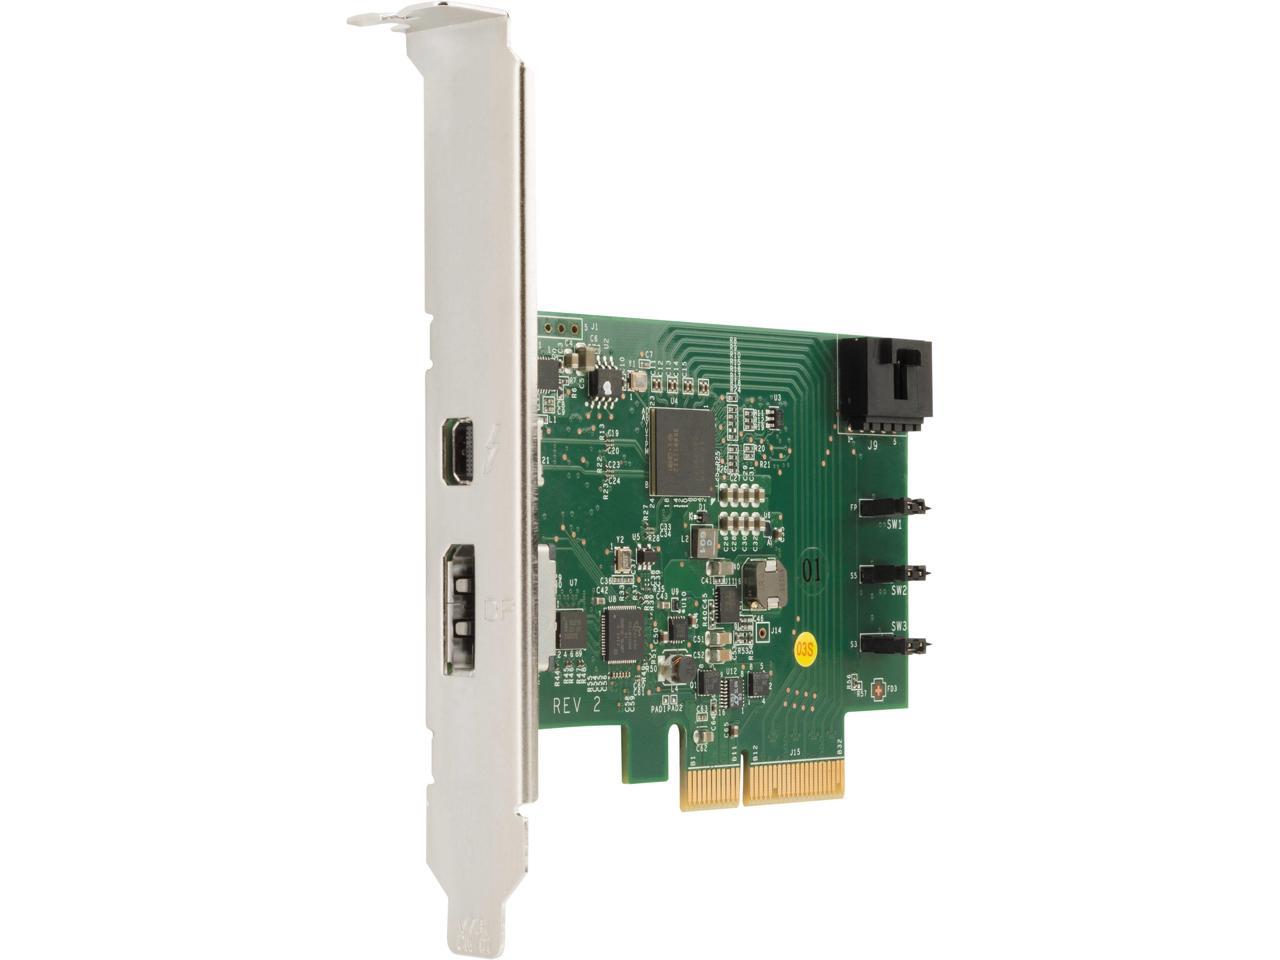 HP 1-port Thunderbolt Adapter with DisplayPort Input - PCI Express - Plug-in Card - 1 Thunderbolt Port(s)